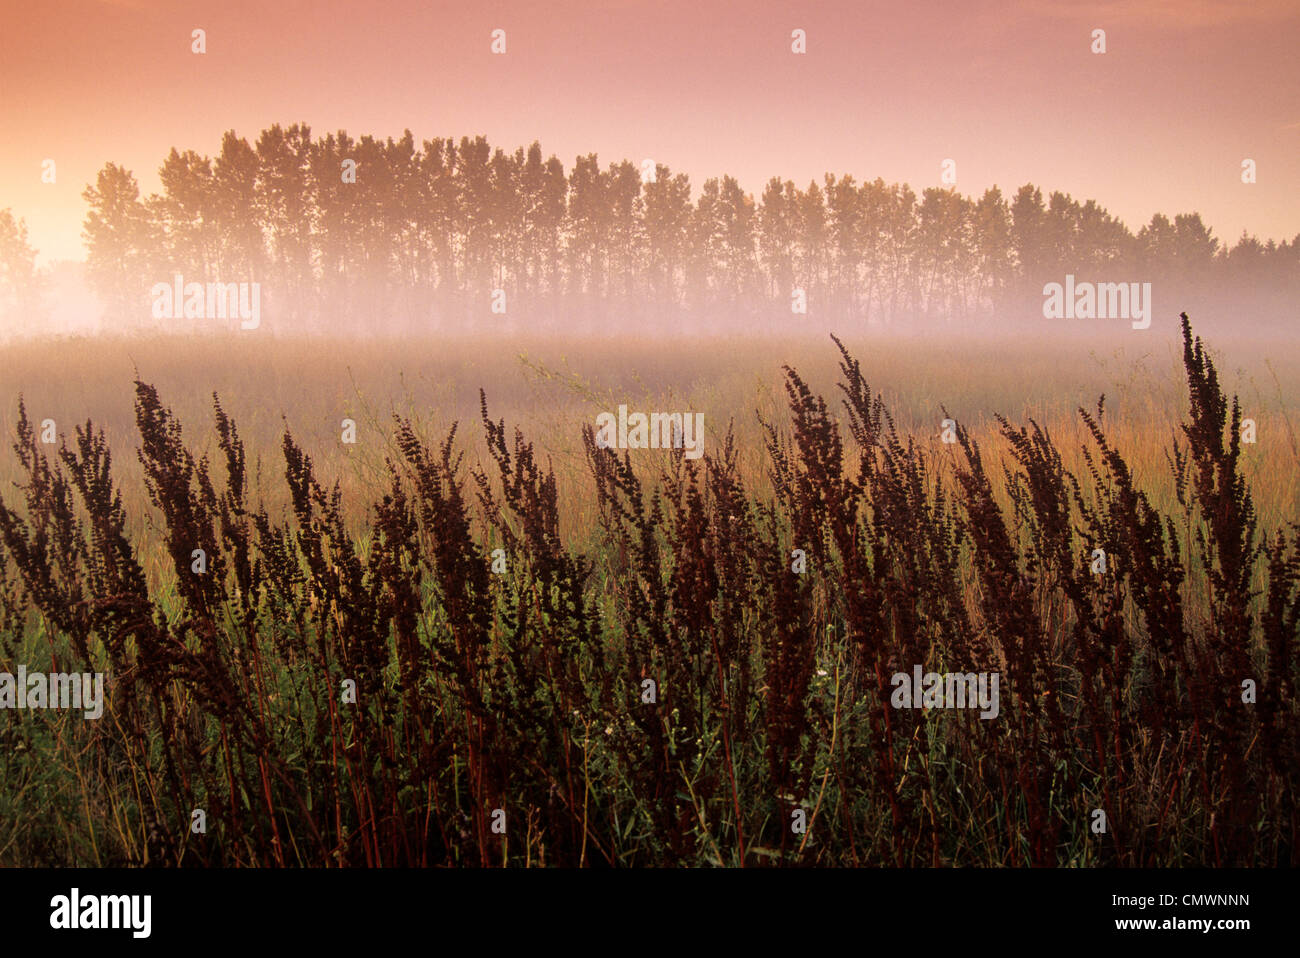 Common Dock (weed) with Aspen Trees in Fog, near St. Adolphe, Manitoba Stock Photo